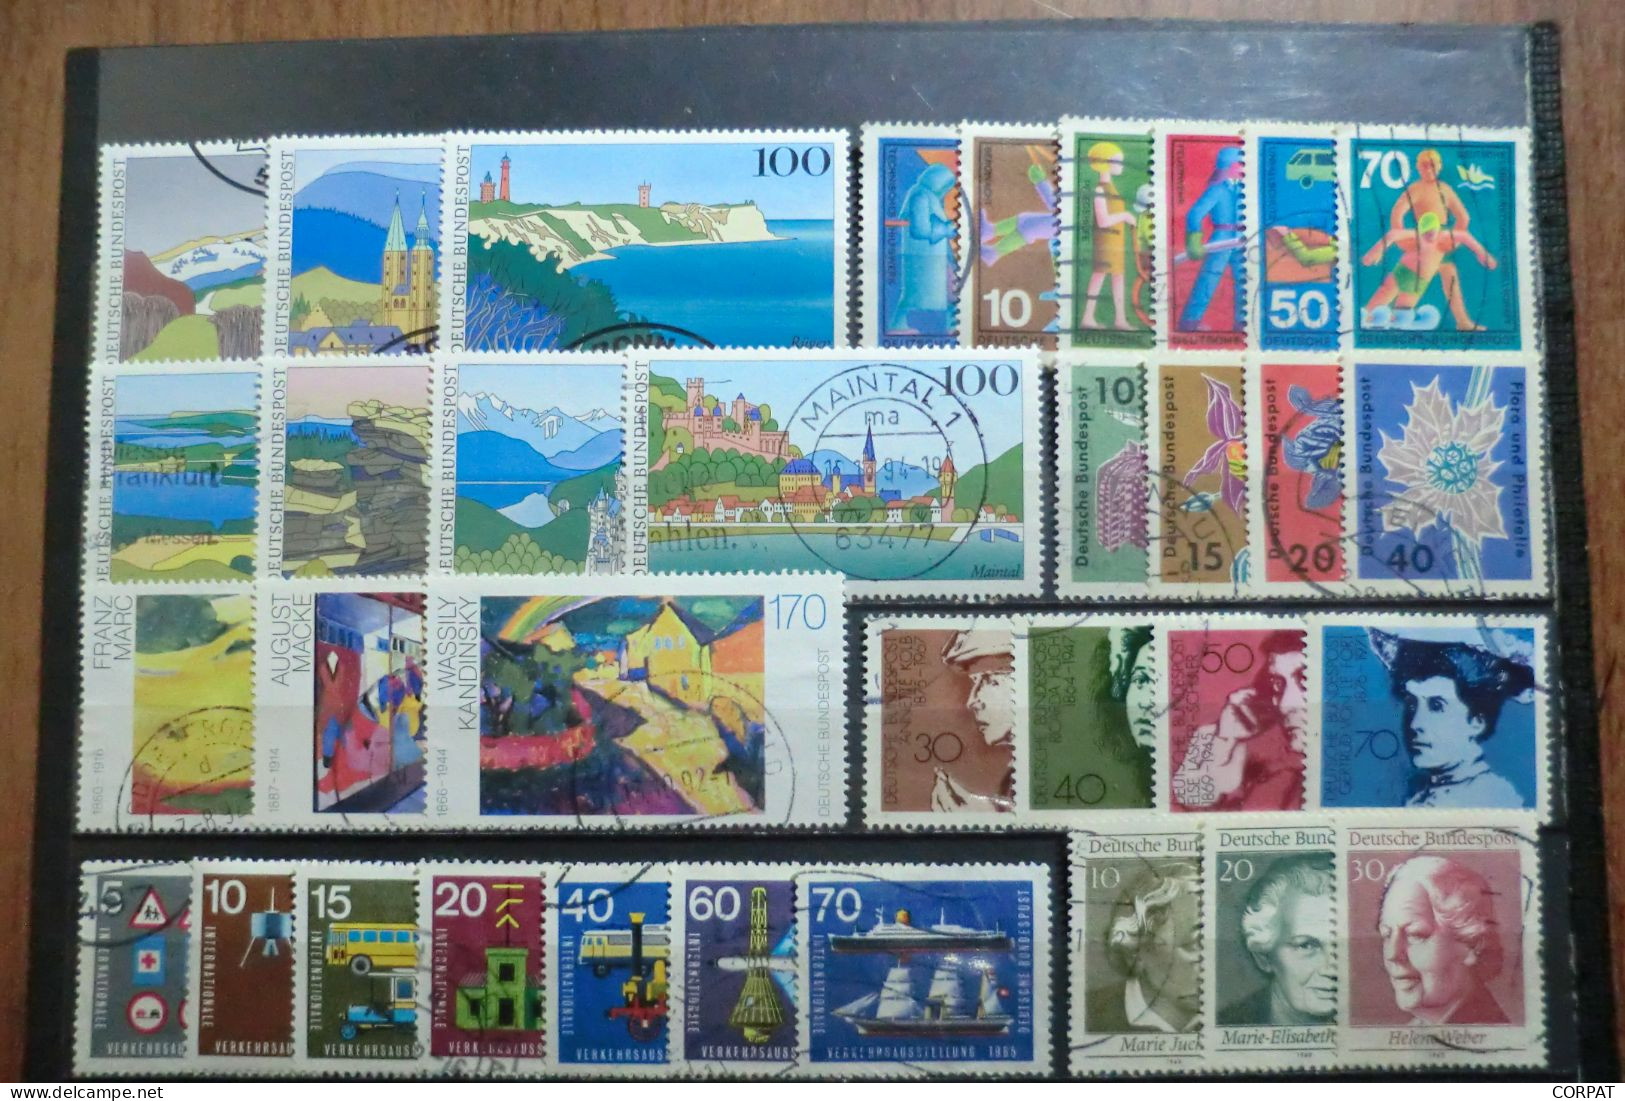 Germany.Lot of  used stamps (8 photos)